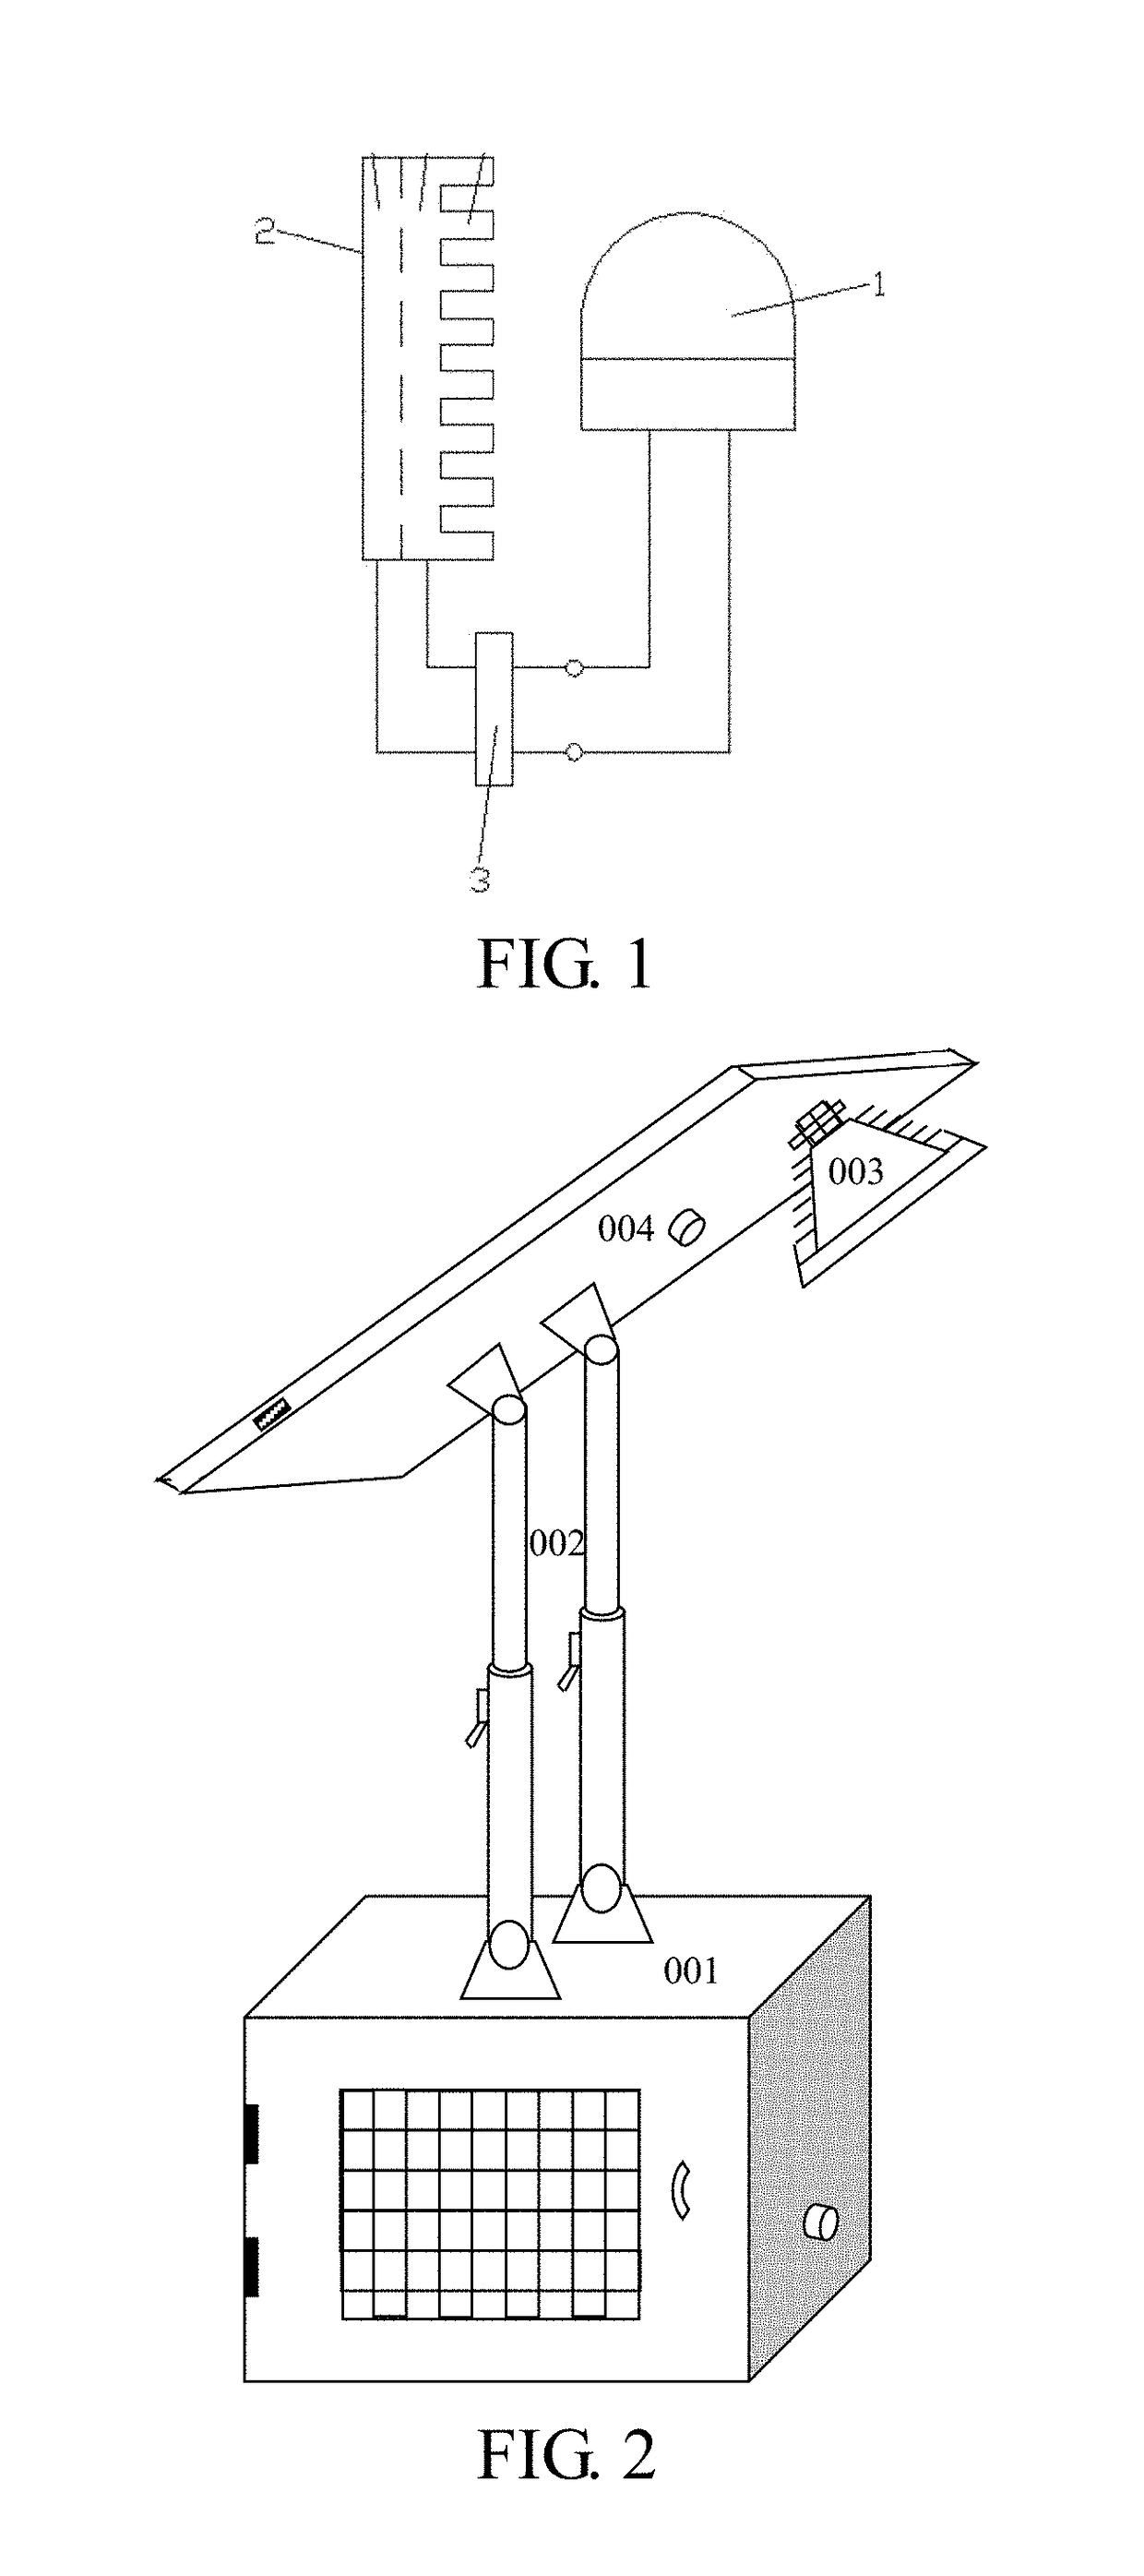 Portable lighting device with thermoelectric power source